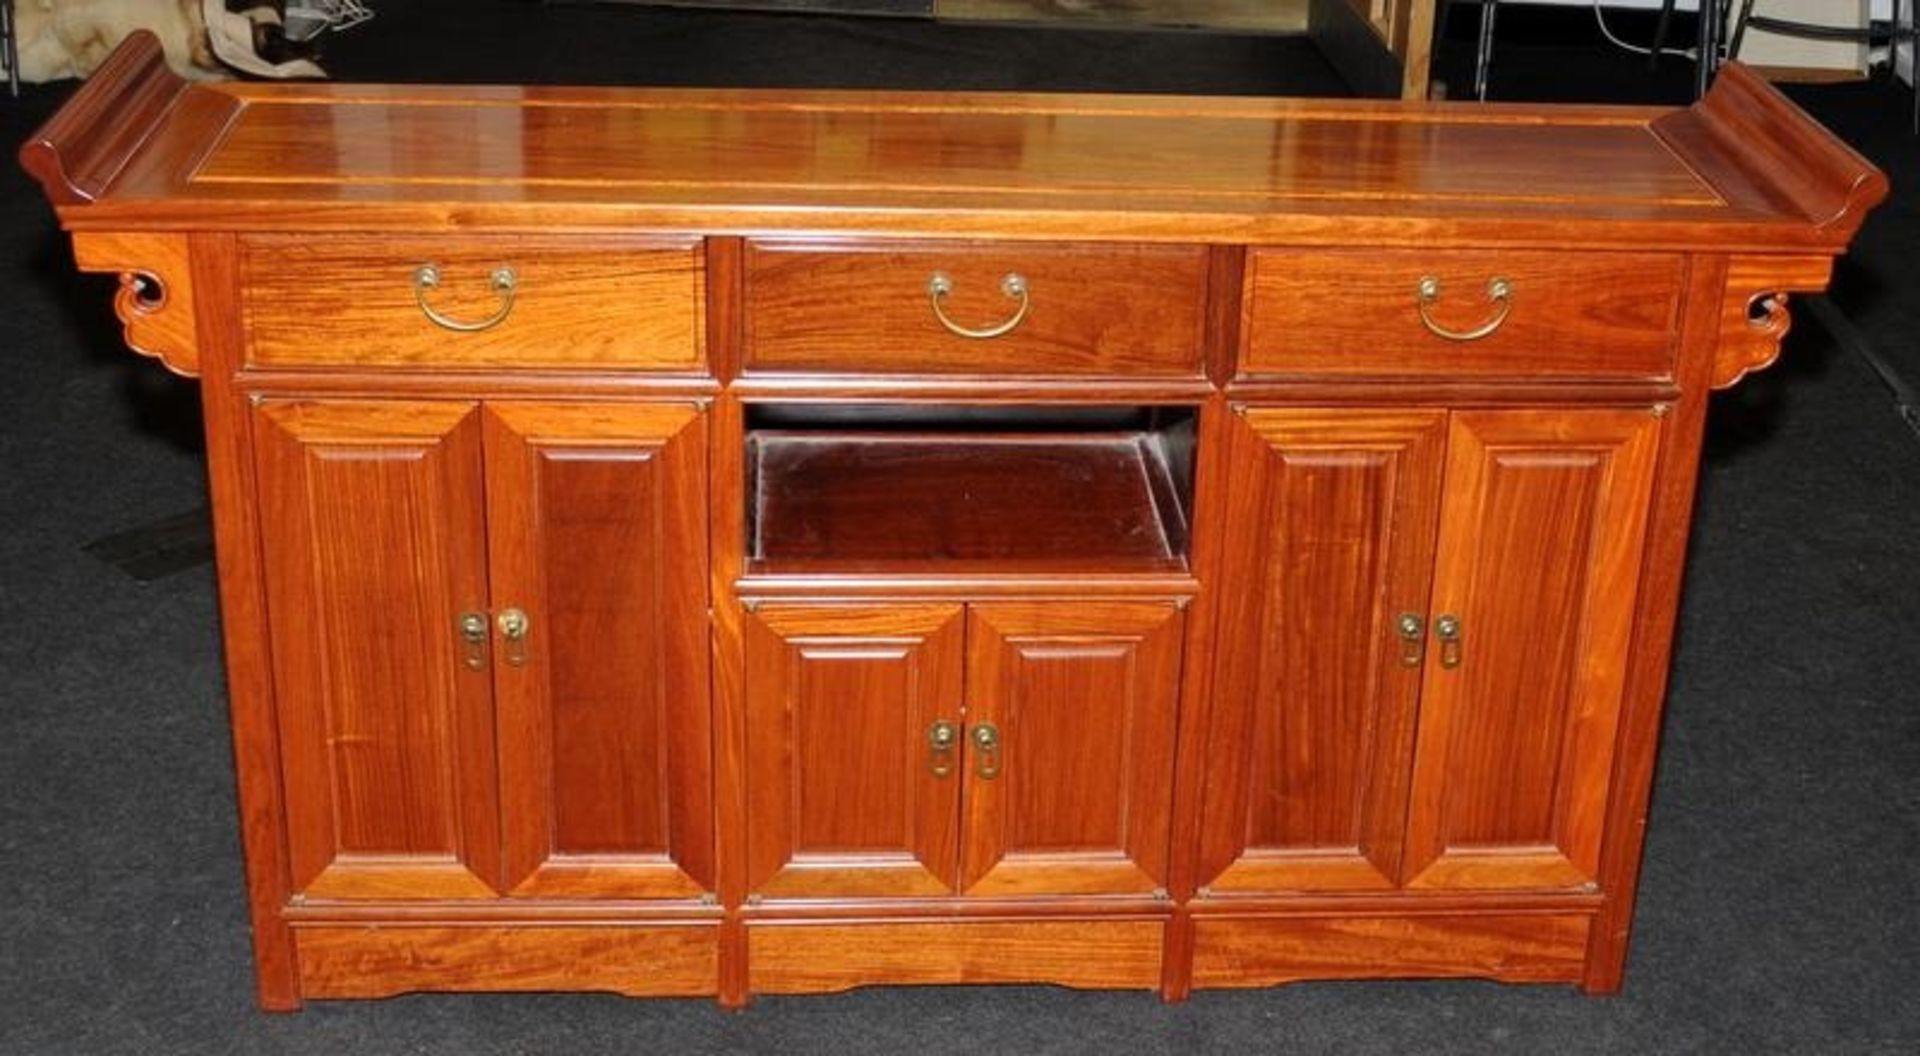 Chinese style hall table with three drawers over cupboards. 148cms wide x 81cms tall x 35cms deep